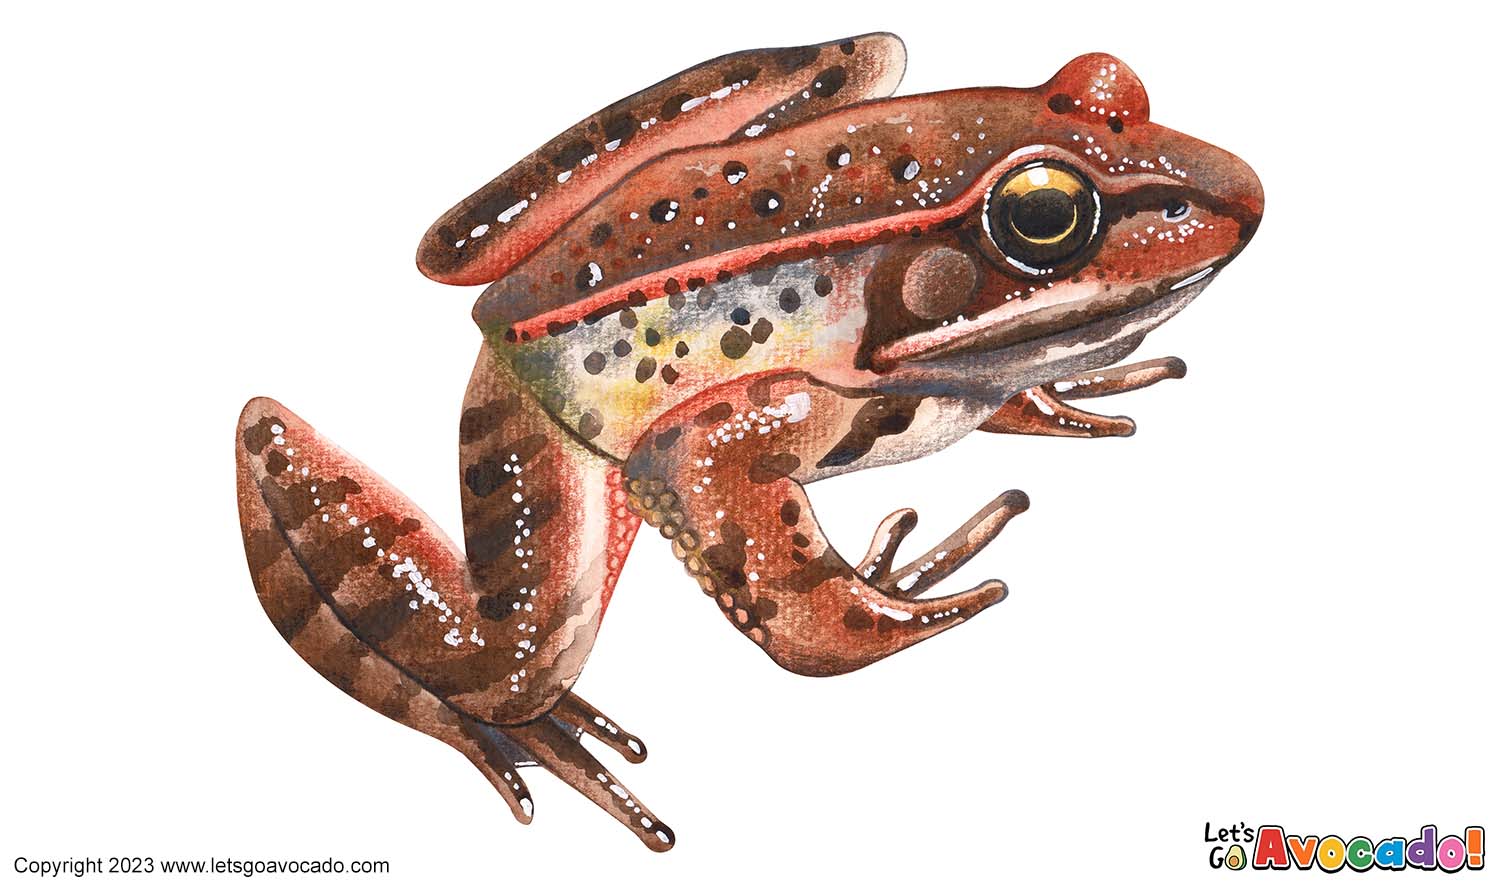 Northern Red-Legged Frog